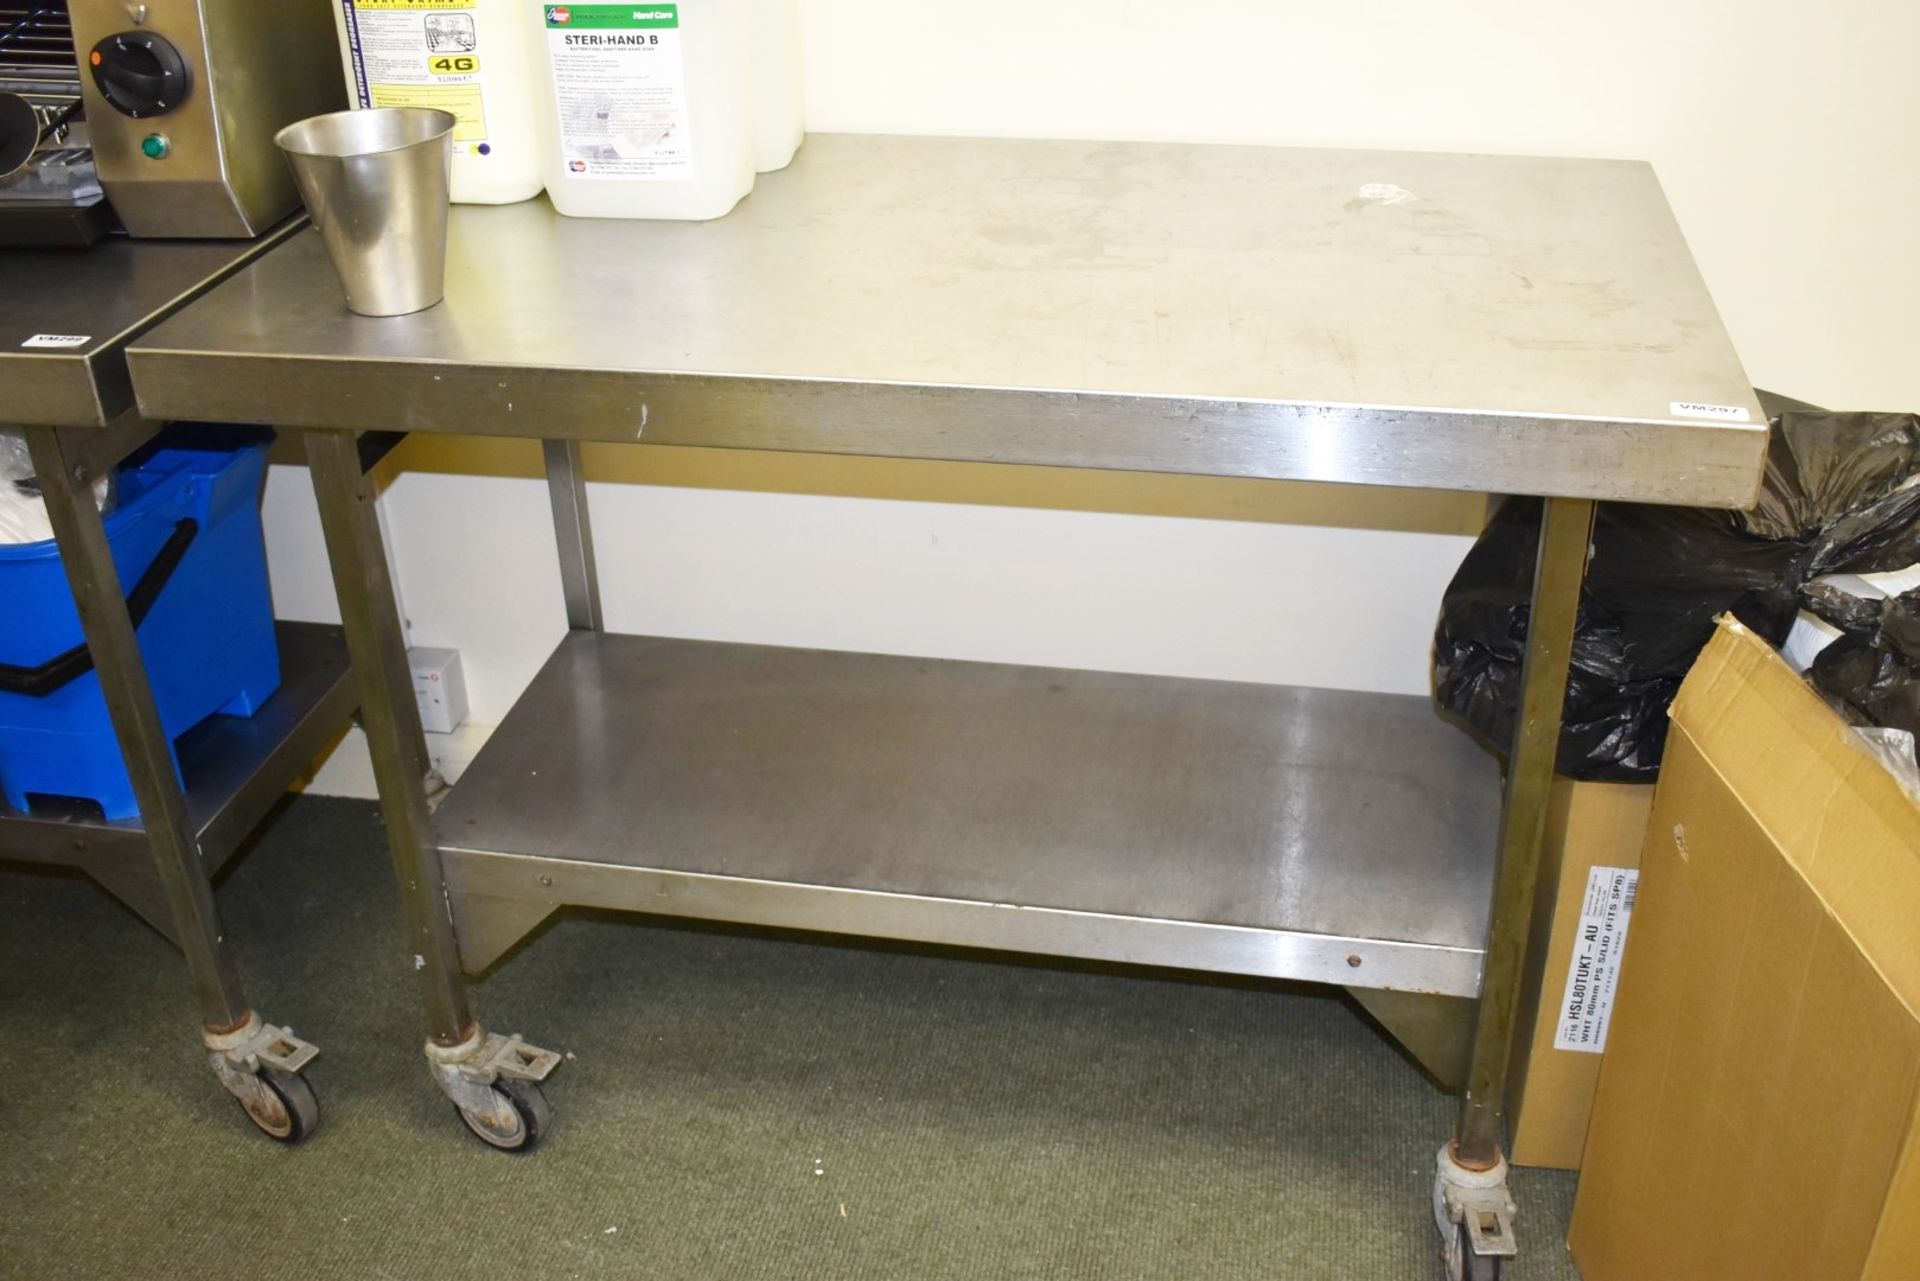 1 x Stainless Steel Prep Bench With Undershelf and Castor Wheels - H87 x W120 x D65 cms - Ref